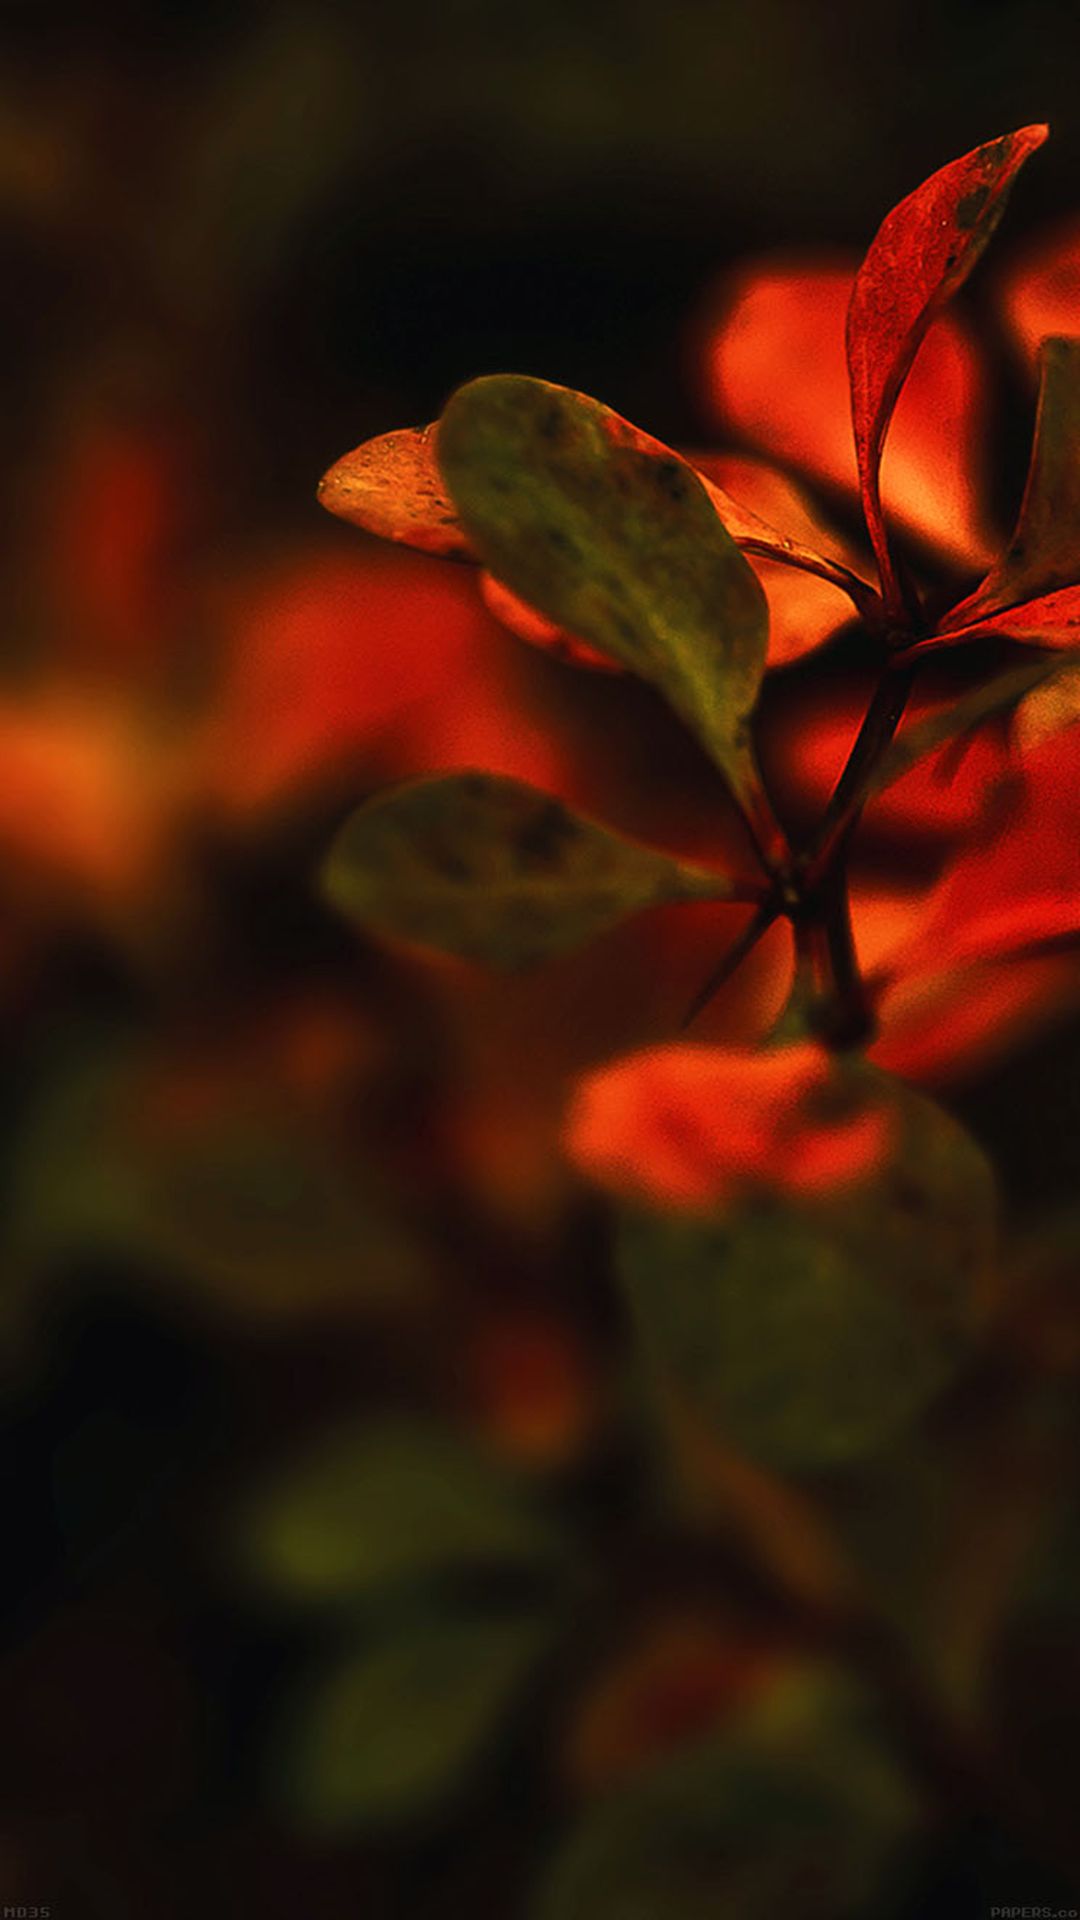 Nature Branch Leaves Red Sunset Blur iPhone 6 Wallpaper Download. iPhone Wallpaper, iPad wallpaper. iPhone 6 flower wallpaper, Red sunset, iPhone 5s wallpaper